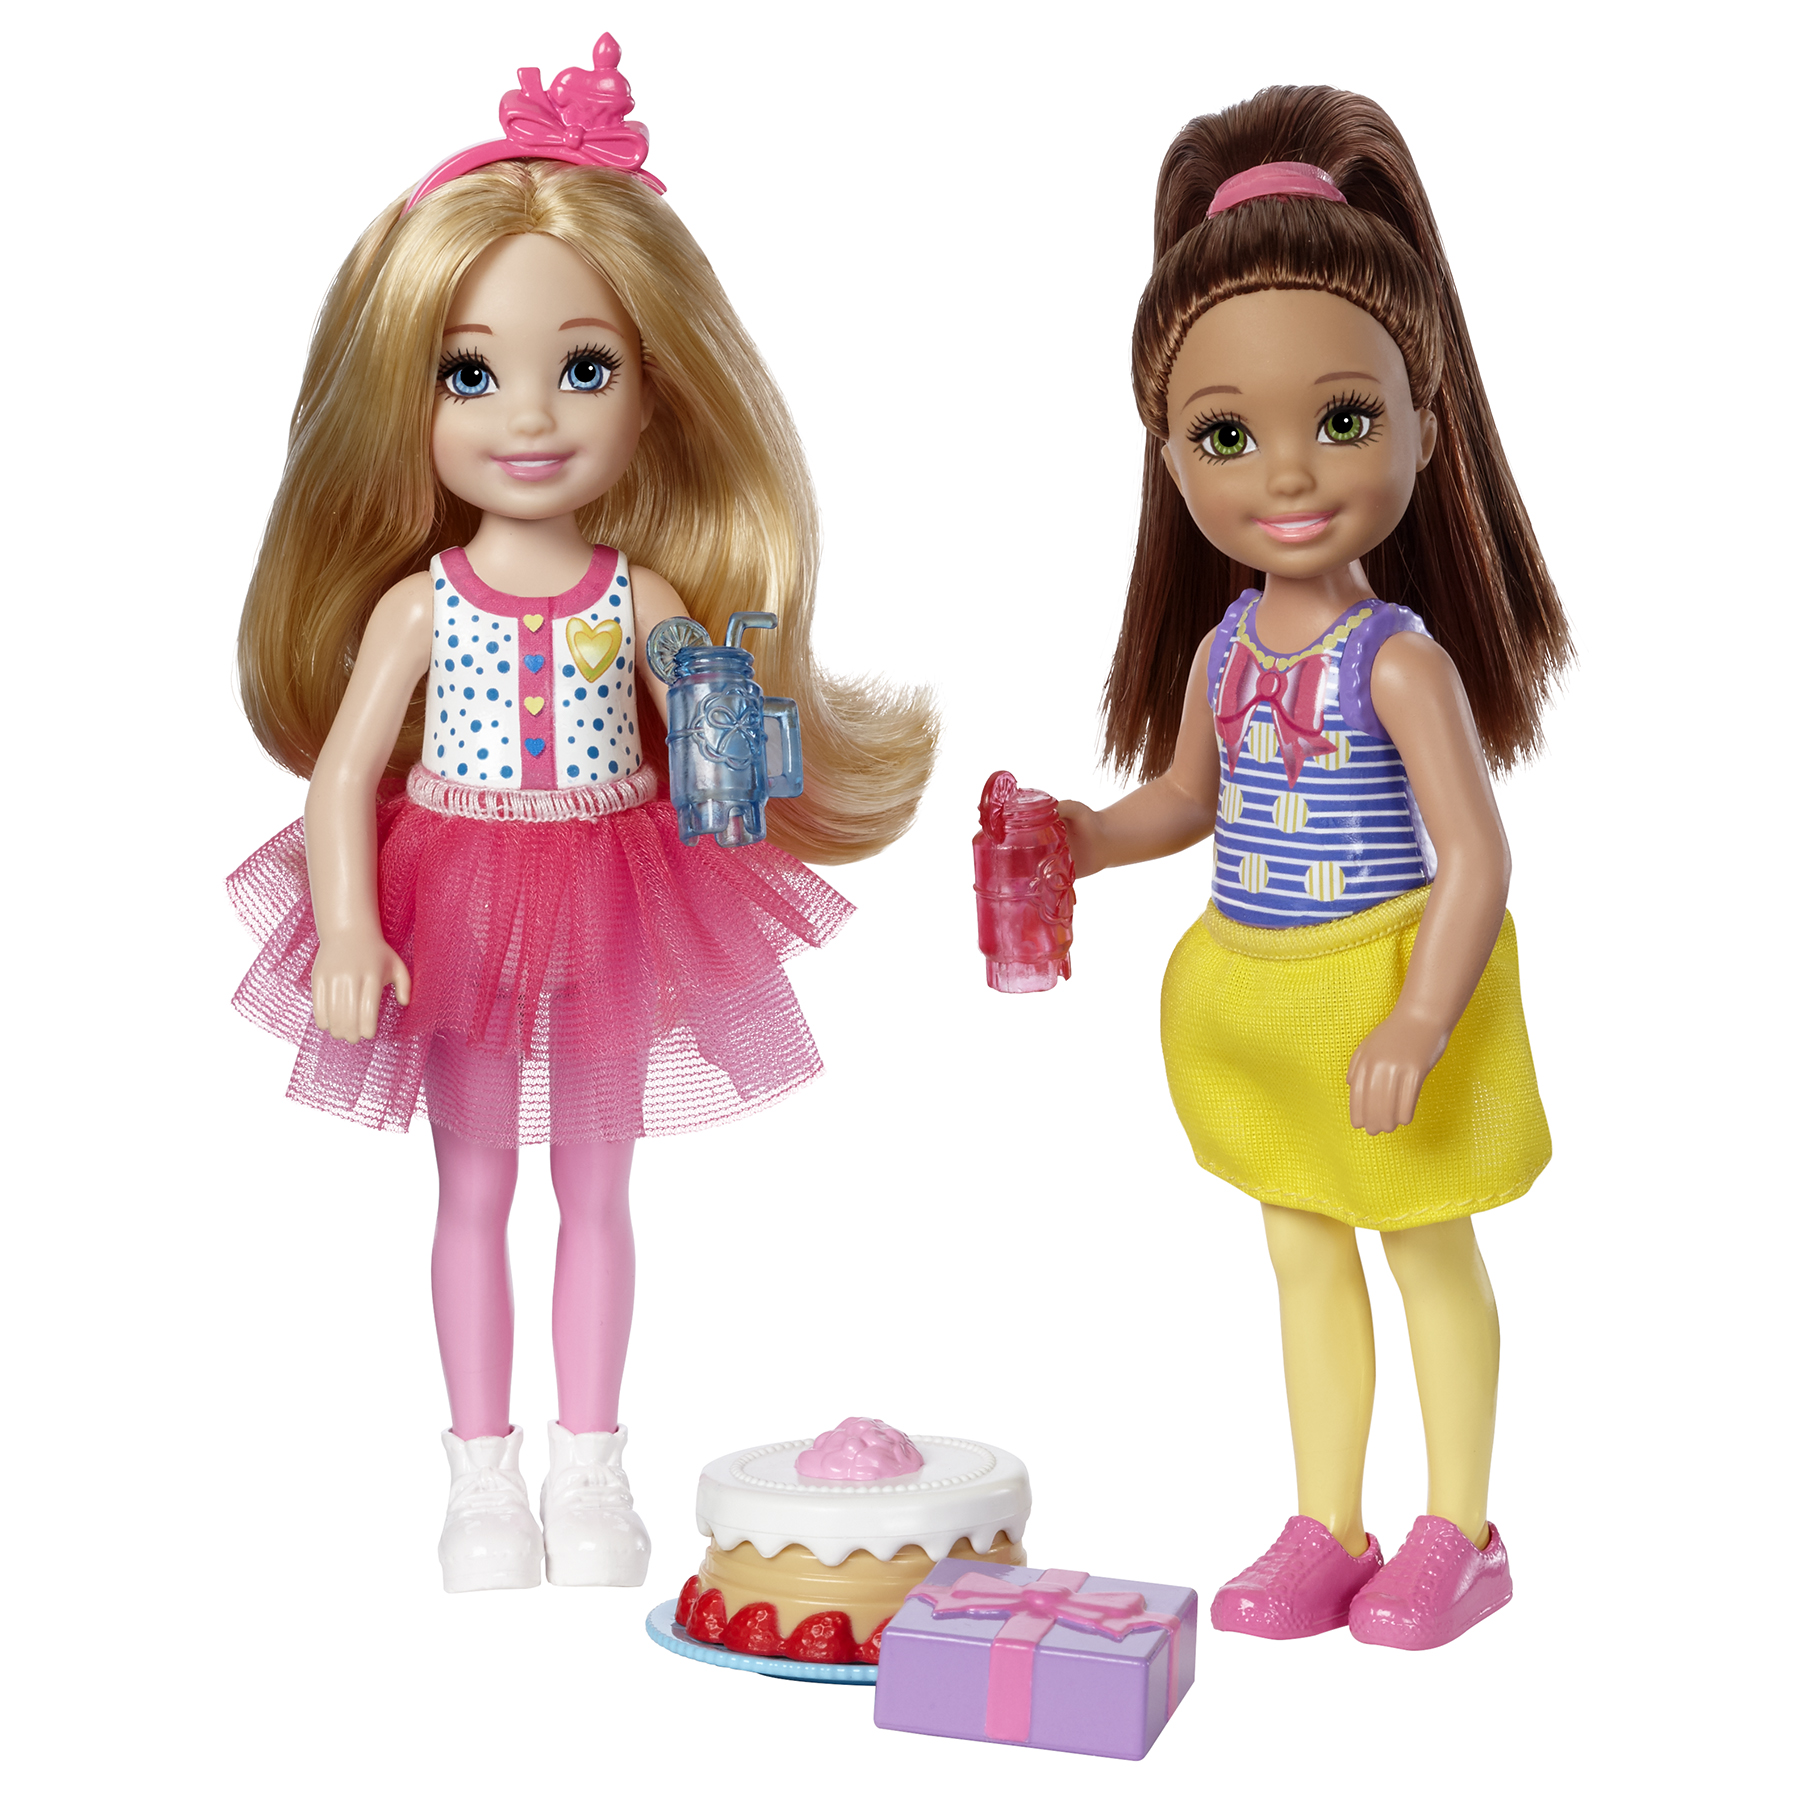 Barbie Club Chelsea 2 Doll and Accessory Set Birthday Party